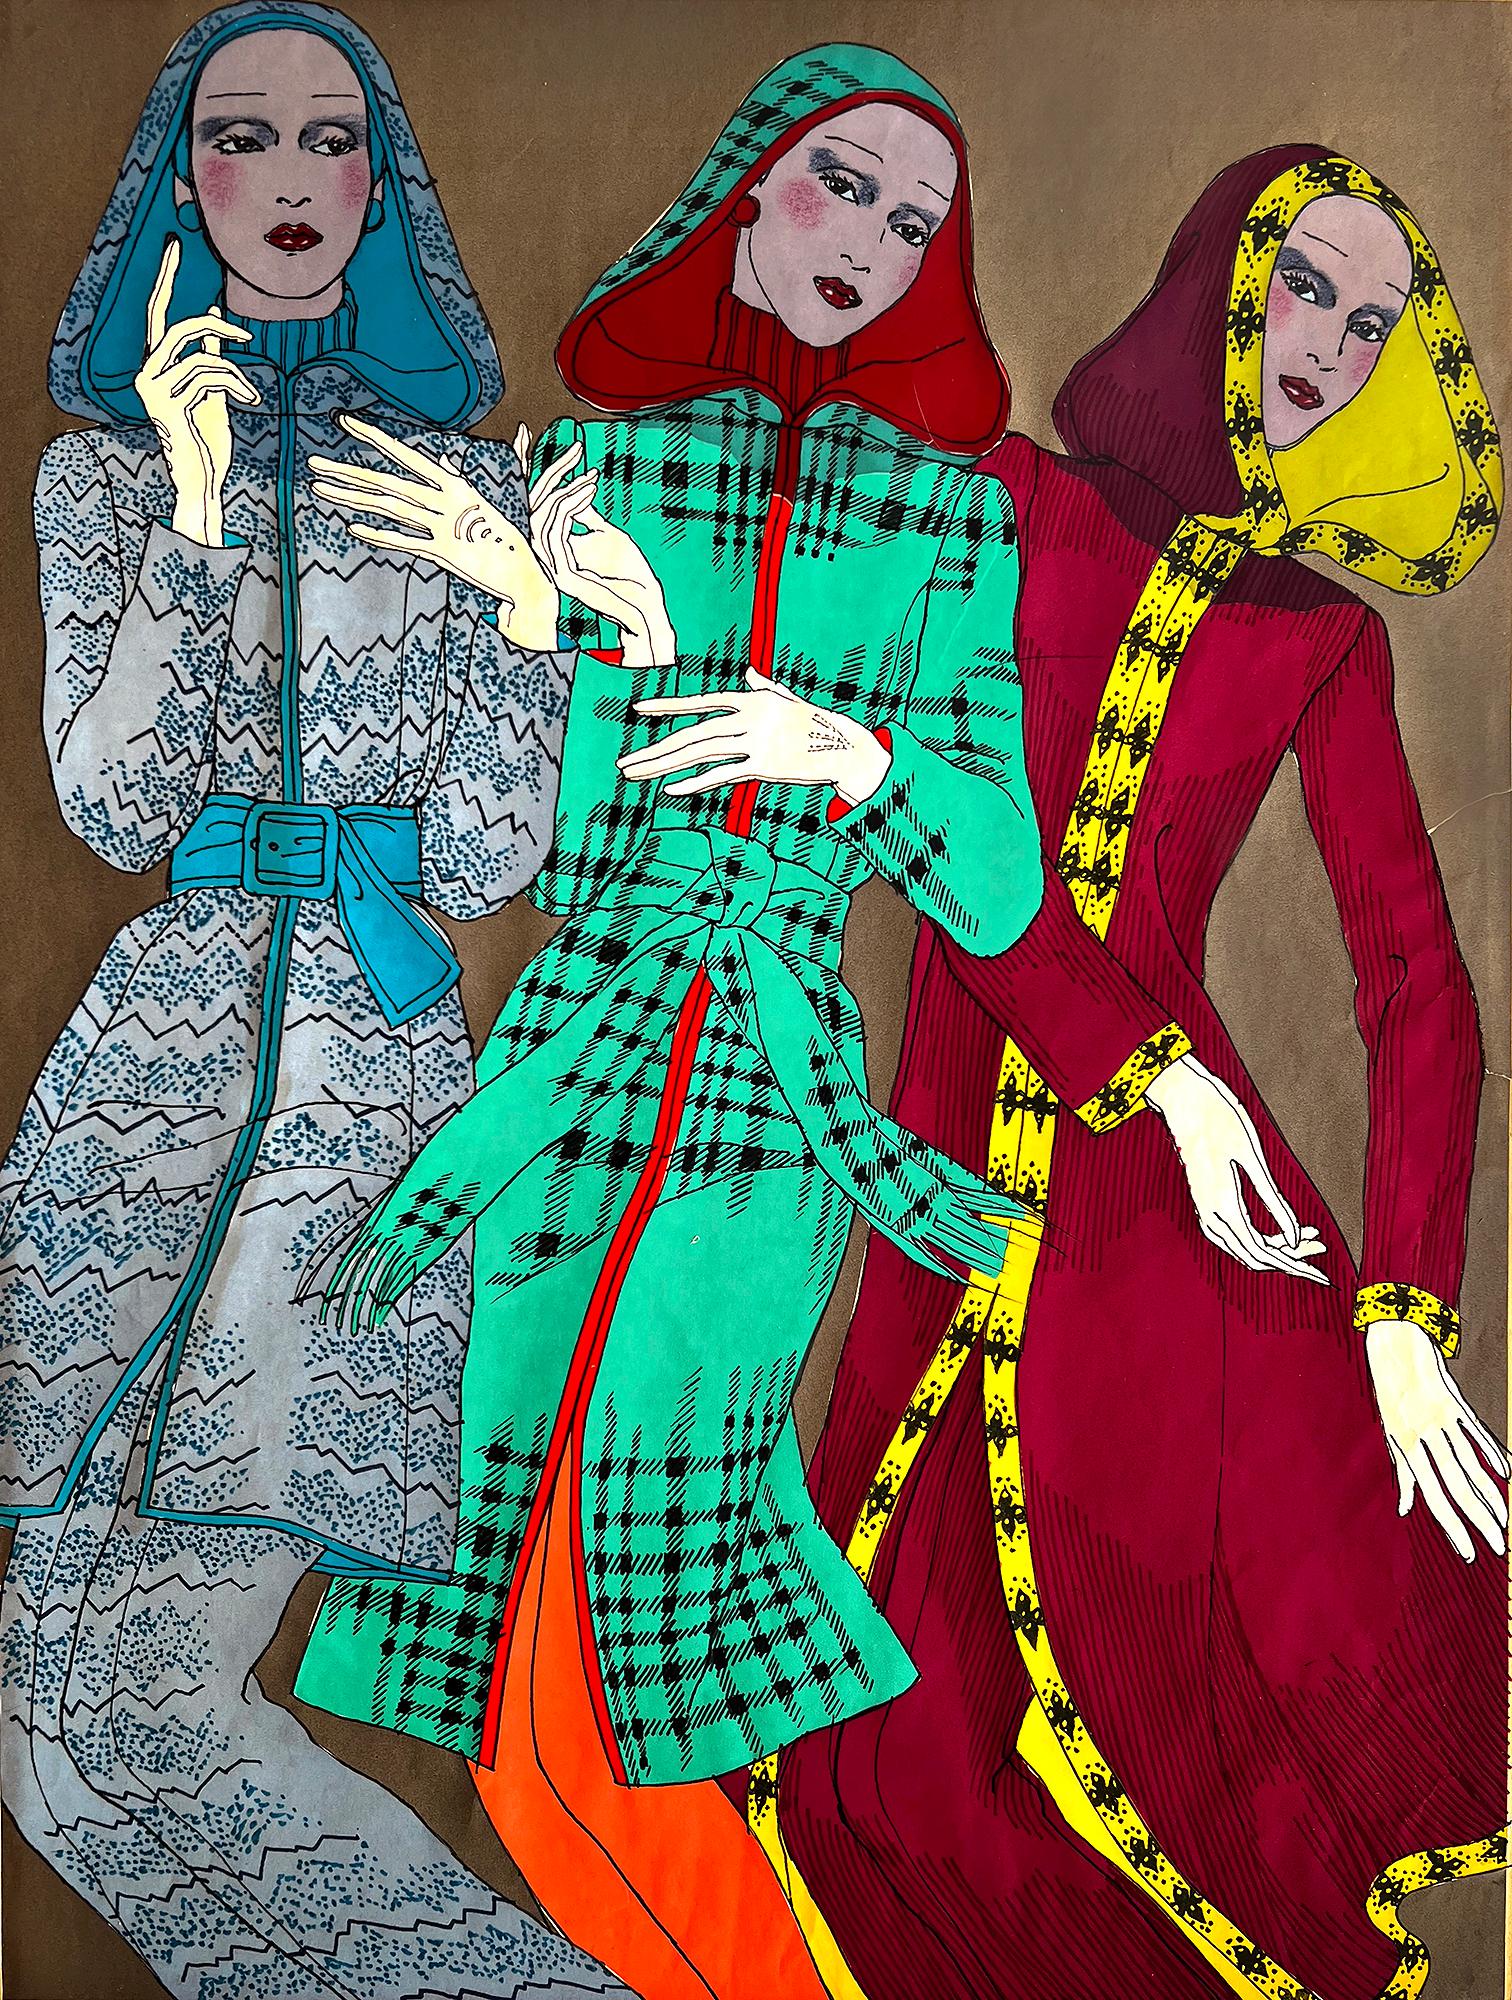 Famed Puerto Rican Fashion Illustrator Antonio Lopez creates an oversized illustration for Vogue Patterns Magazine 1971.  He uses a variety of media which includes watercolor, ink, colored paper and monochromatic acetates. Unsigned. The work comes